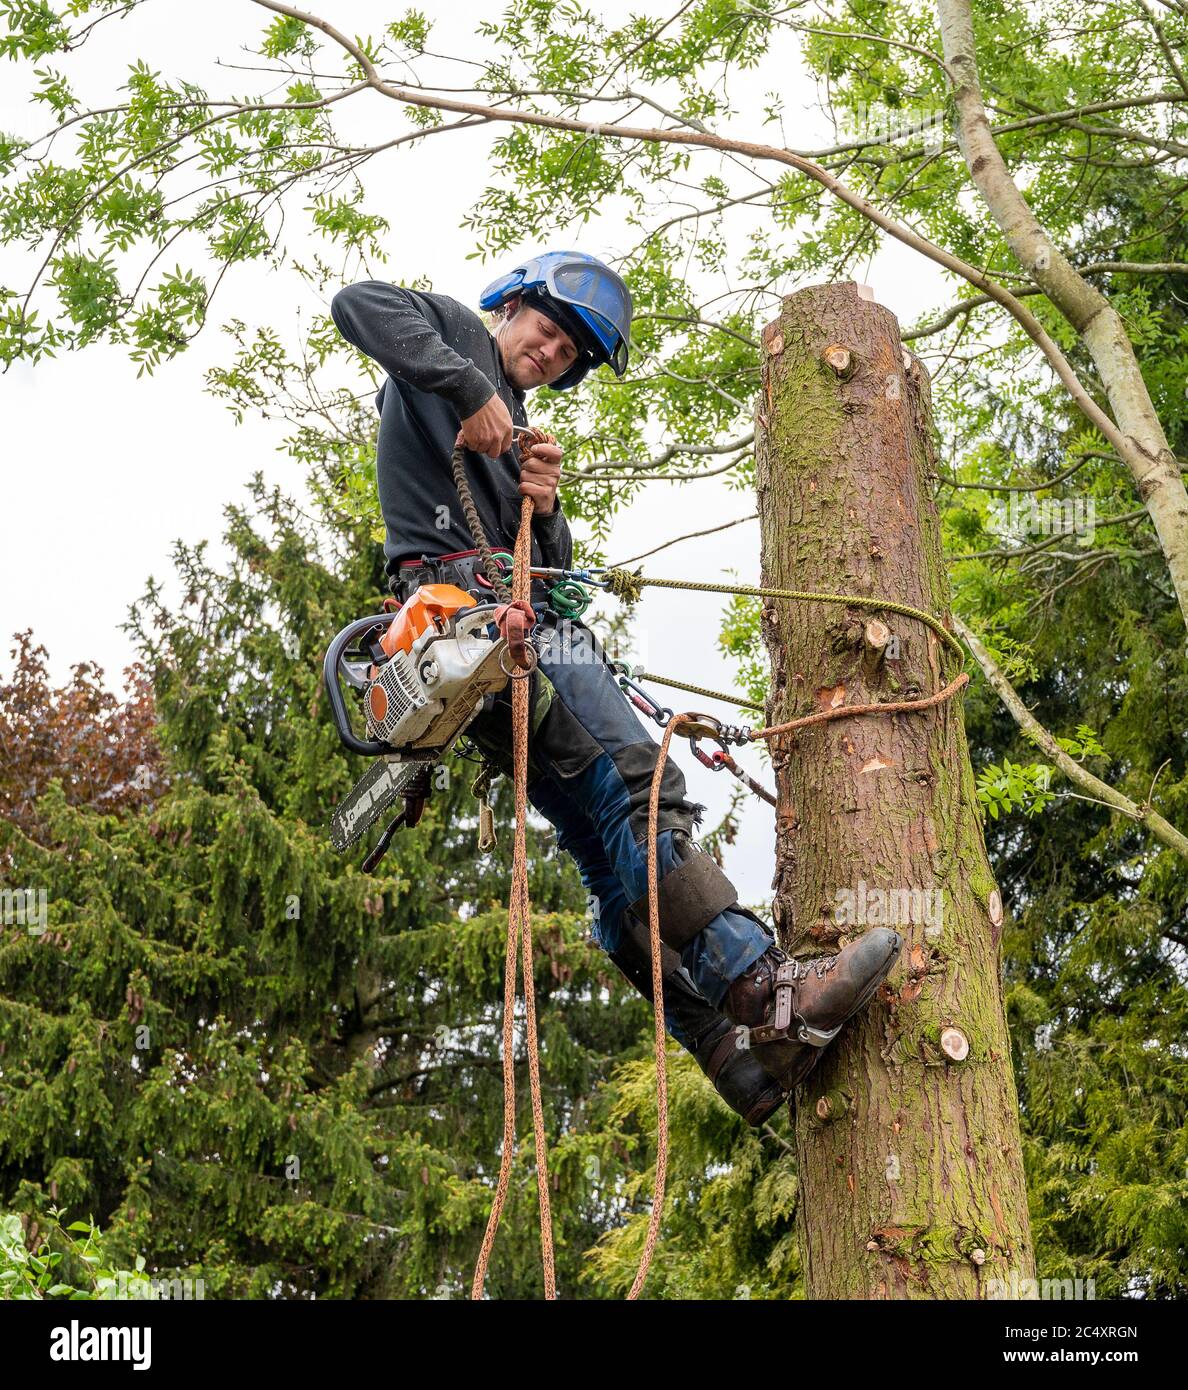 A Tree Surgeon or Arborist prepearing to cut down a tall tree stump with a chainsaw. Stock Photo